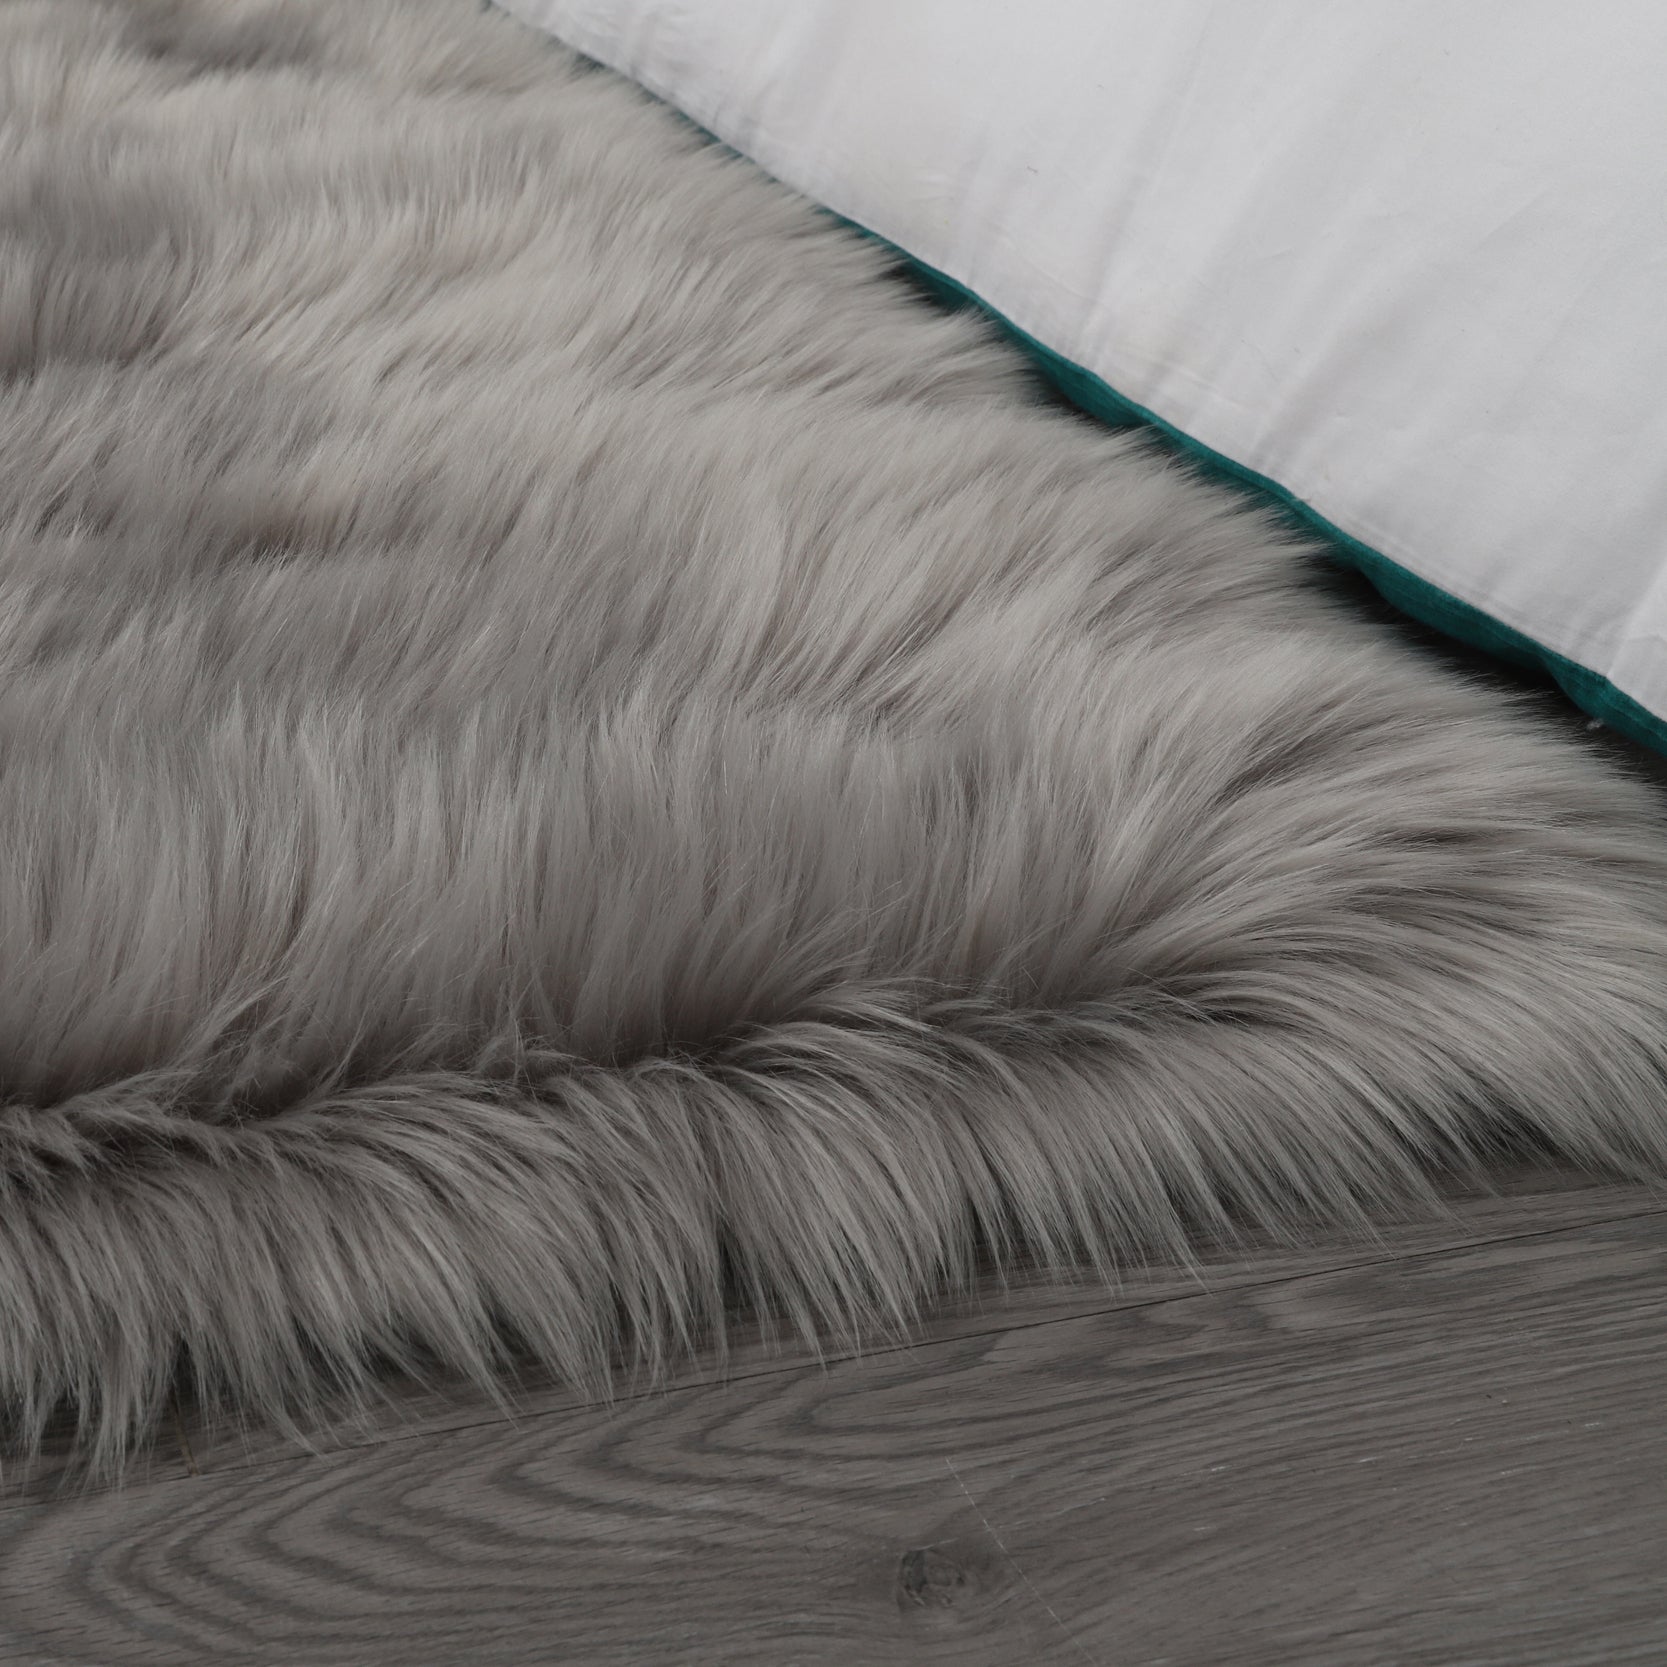 7' x 5' Cozy Collection Ultra Soft Fluffy Faux Fur Sheepskin Area Rug (Gray)